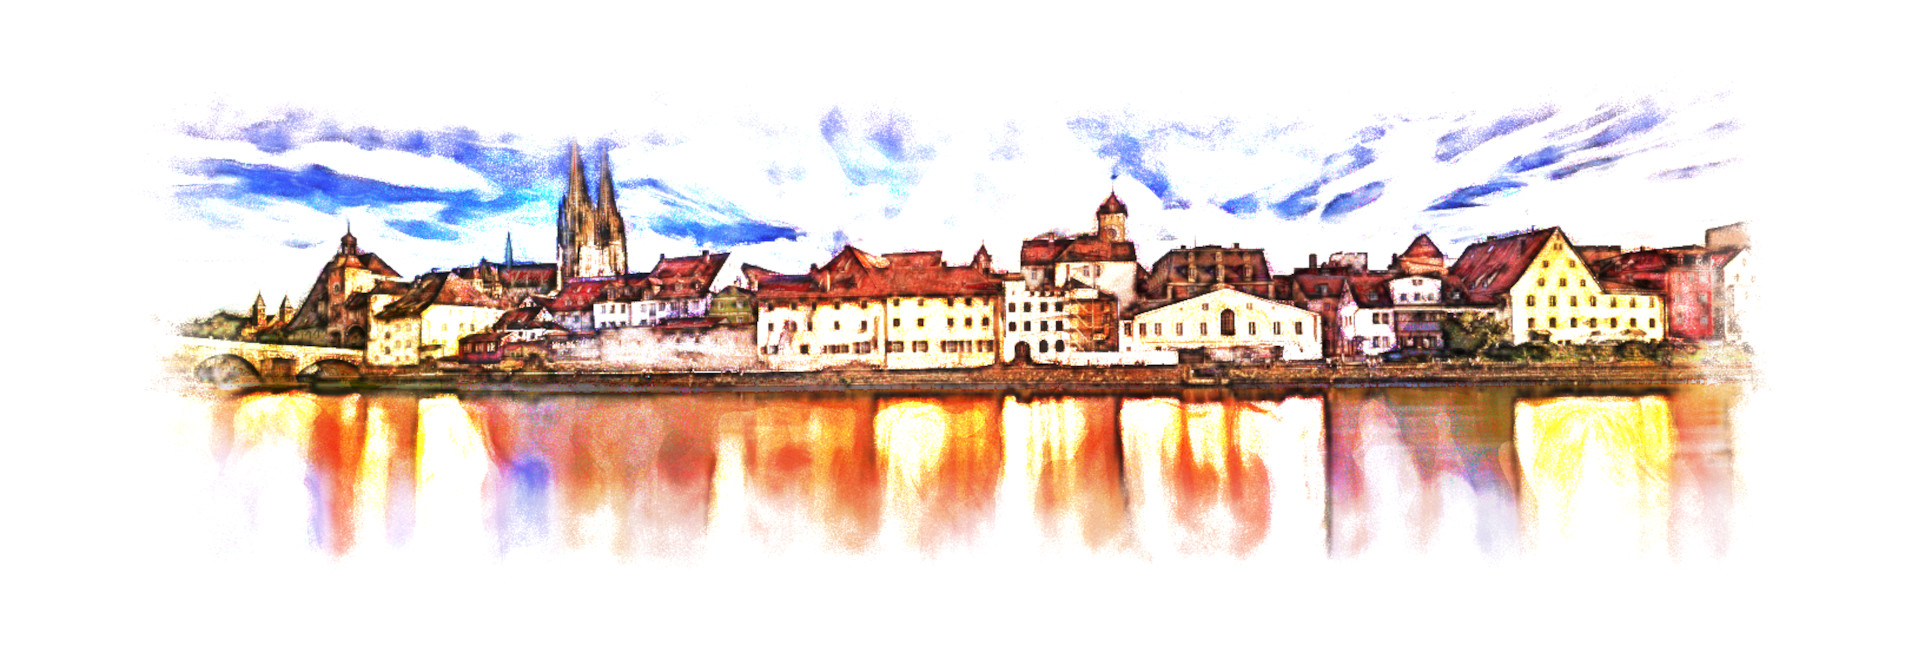 2023-10-01 16-00-42 panorama-2646143_1920 with a Watercolor Pastels Effect 2023 (0.0,80.0,32.0,50.0,0.0,10.0,15.0,True,1).jpeg